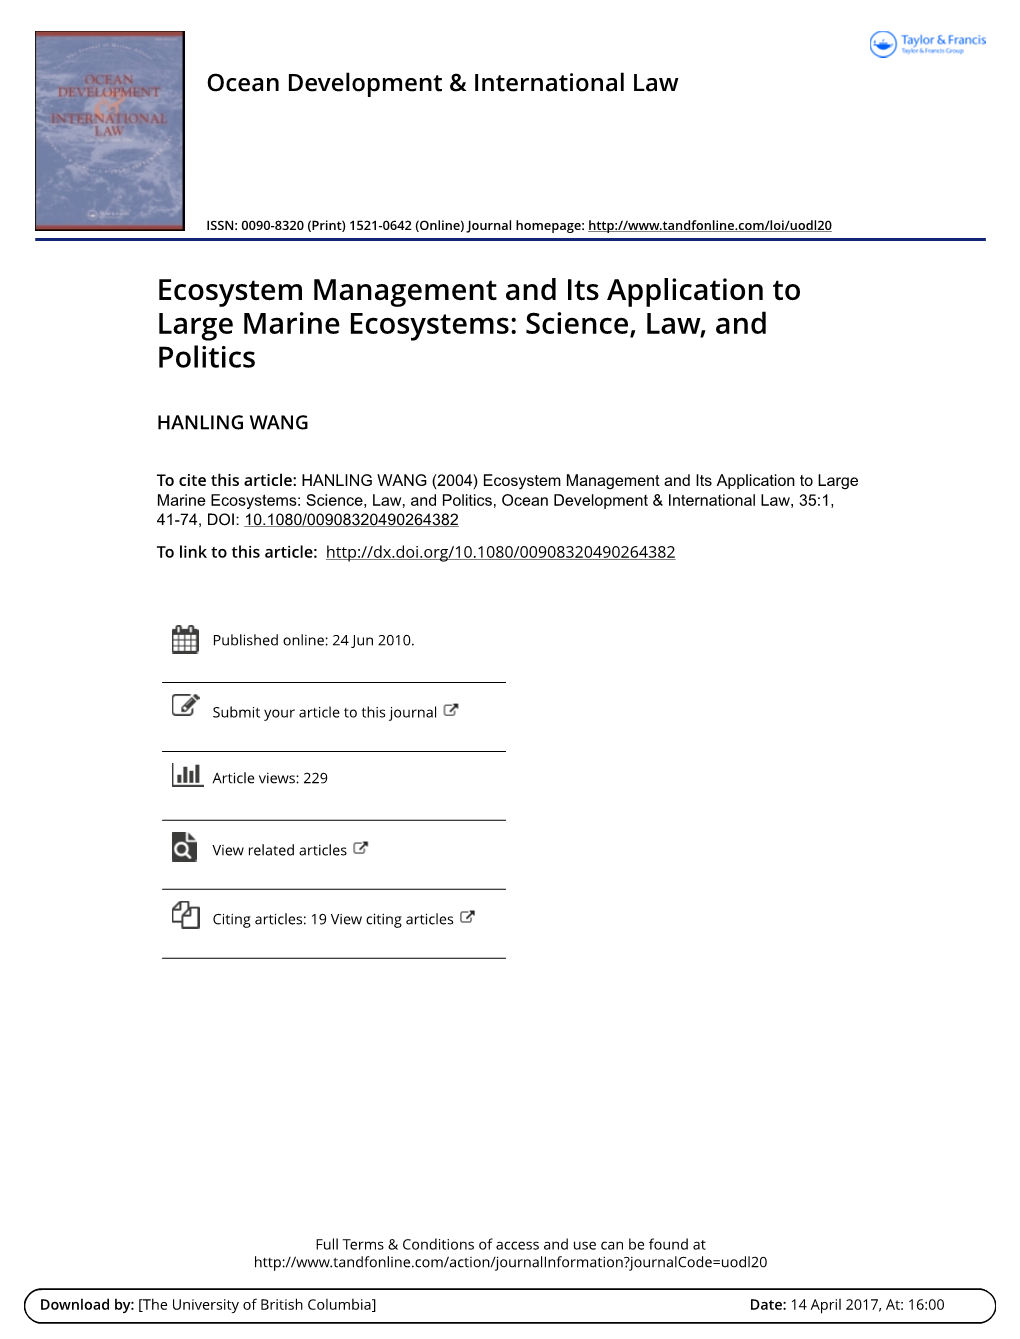 Ecosystem Management and Its Application to Large Marine Ecosystems: Science, Law, and Politics